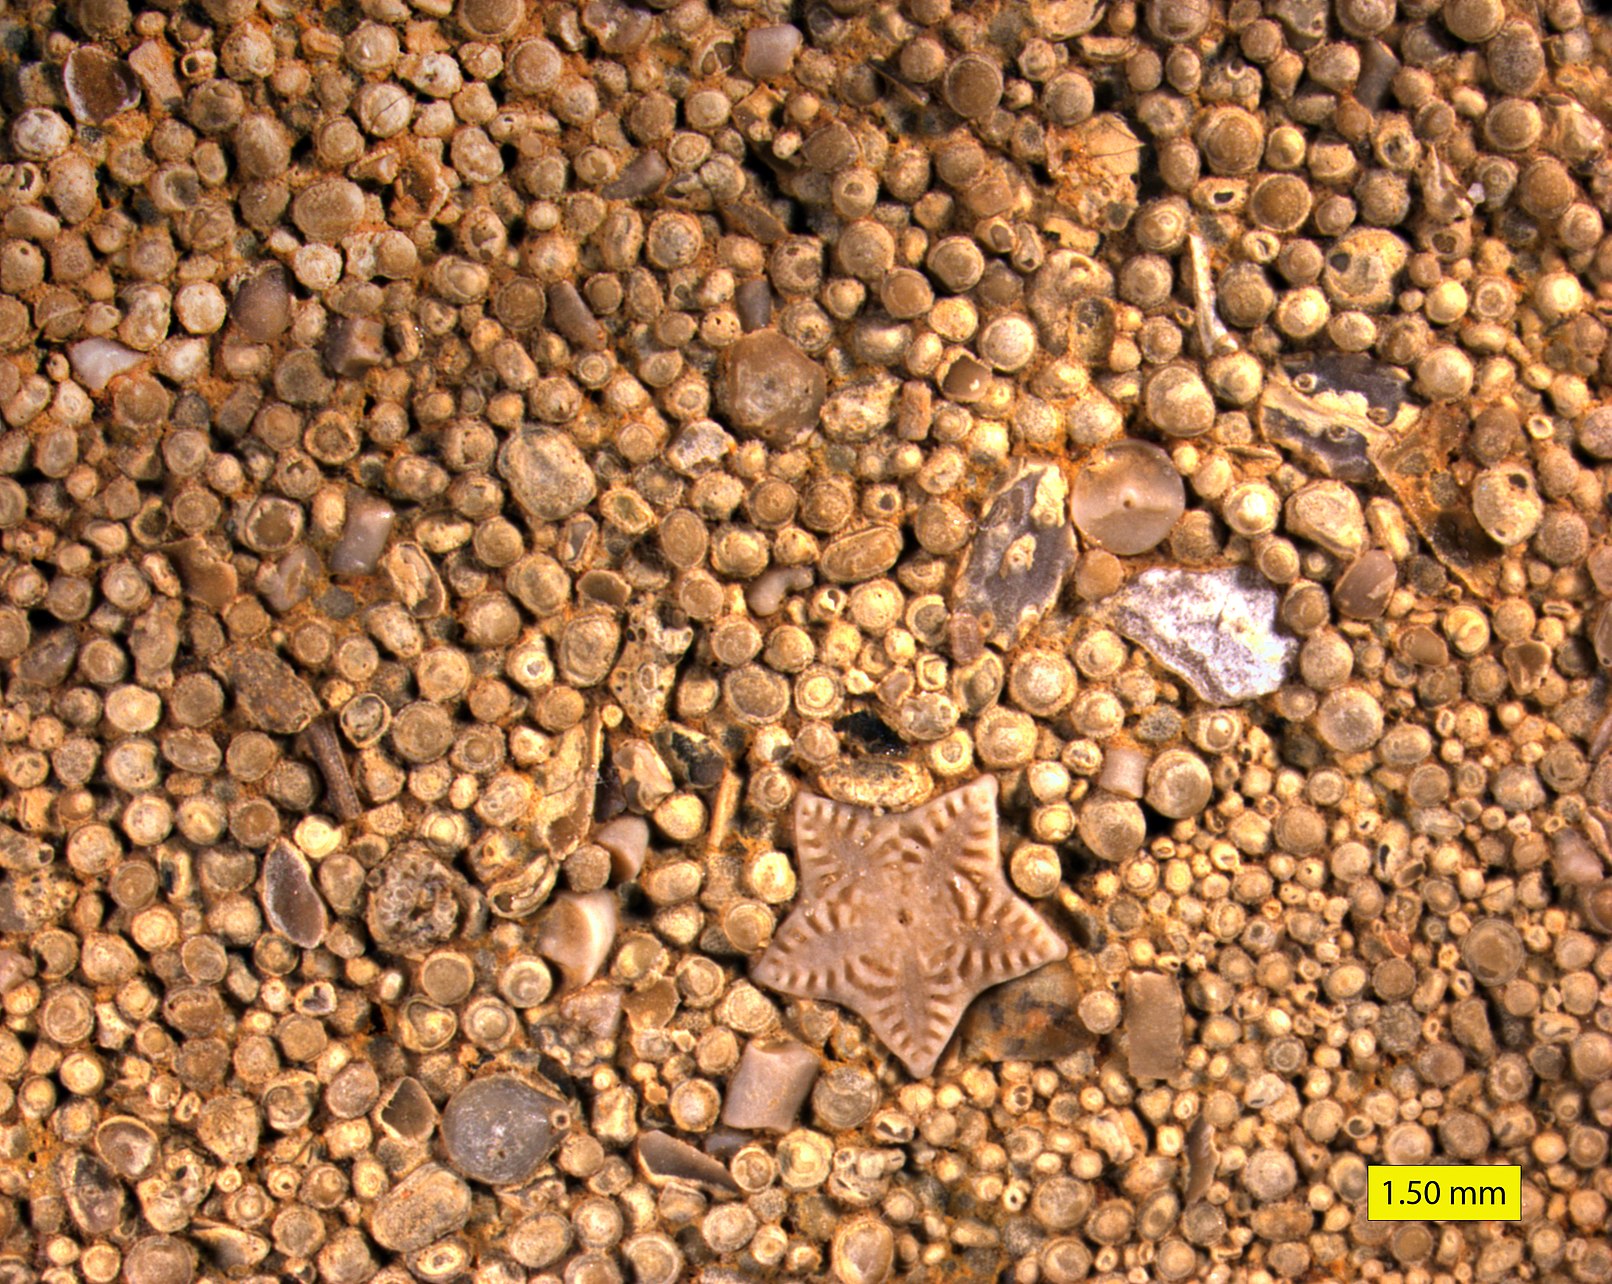 Zoomed-in photo of a cluster of dull tan smooth, rounded grains, with a slightly larger star-shaped grain laying in the cluster as well; a scale bar at the lower right says 1.50 mm.